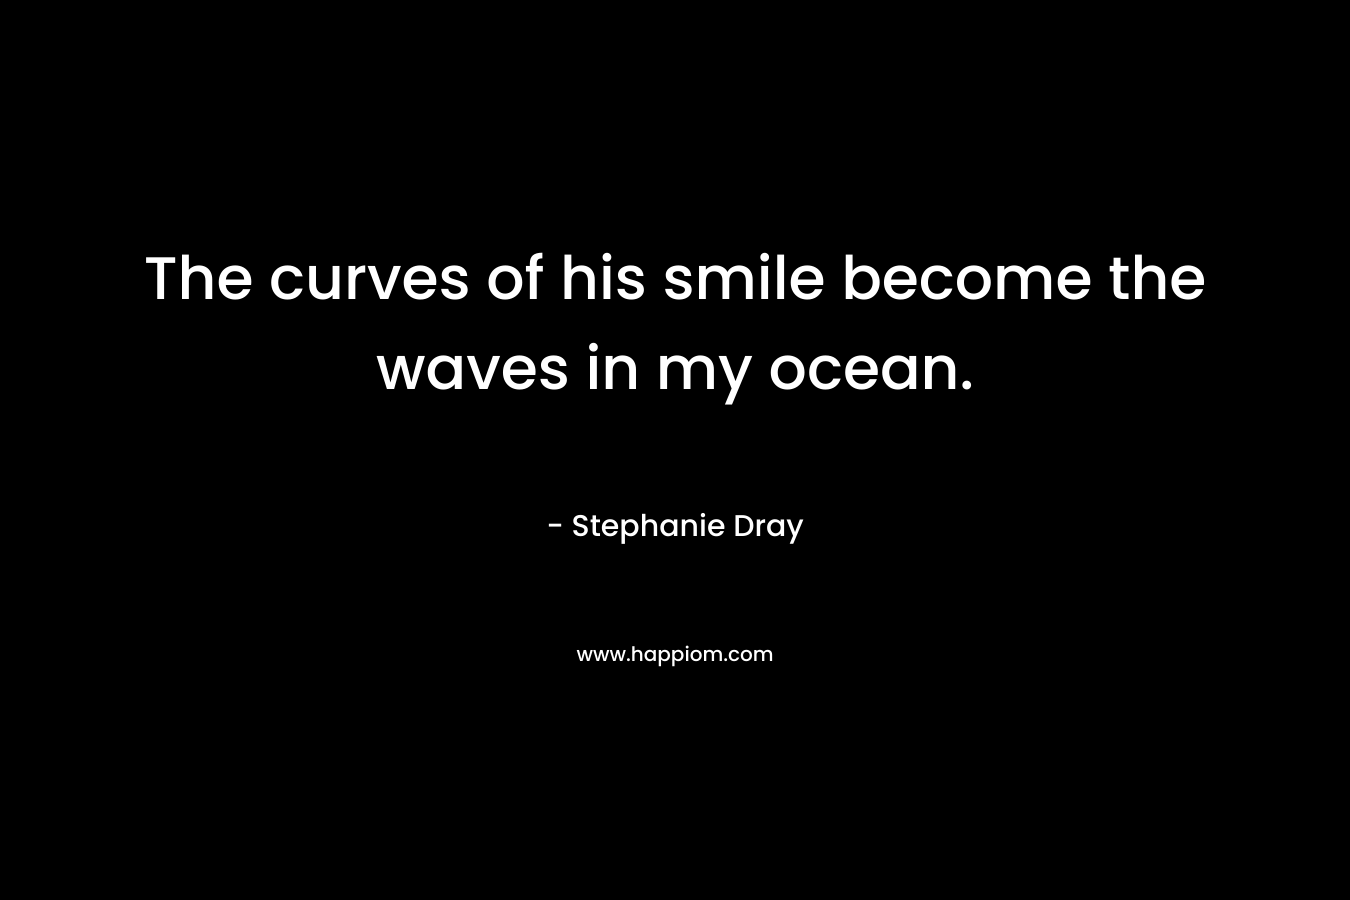 The curves of his smile become the waves in my ocean.